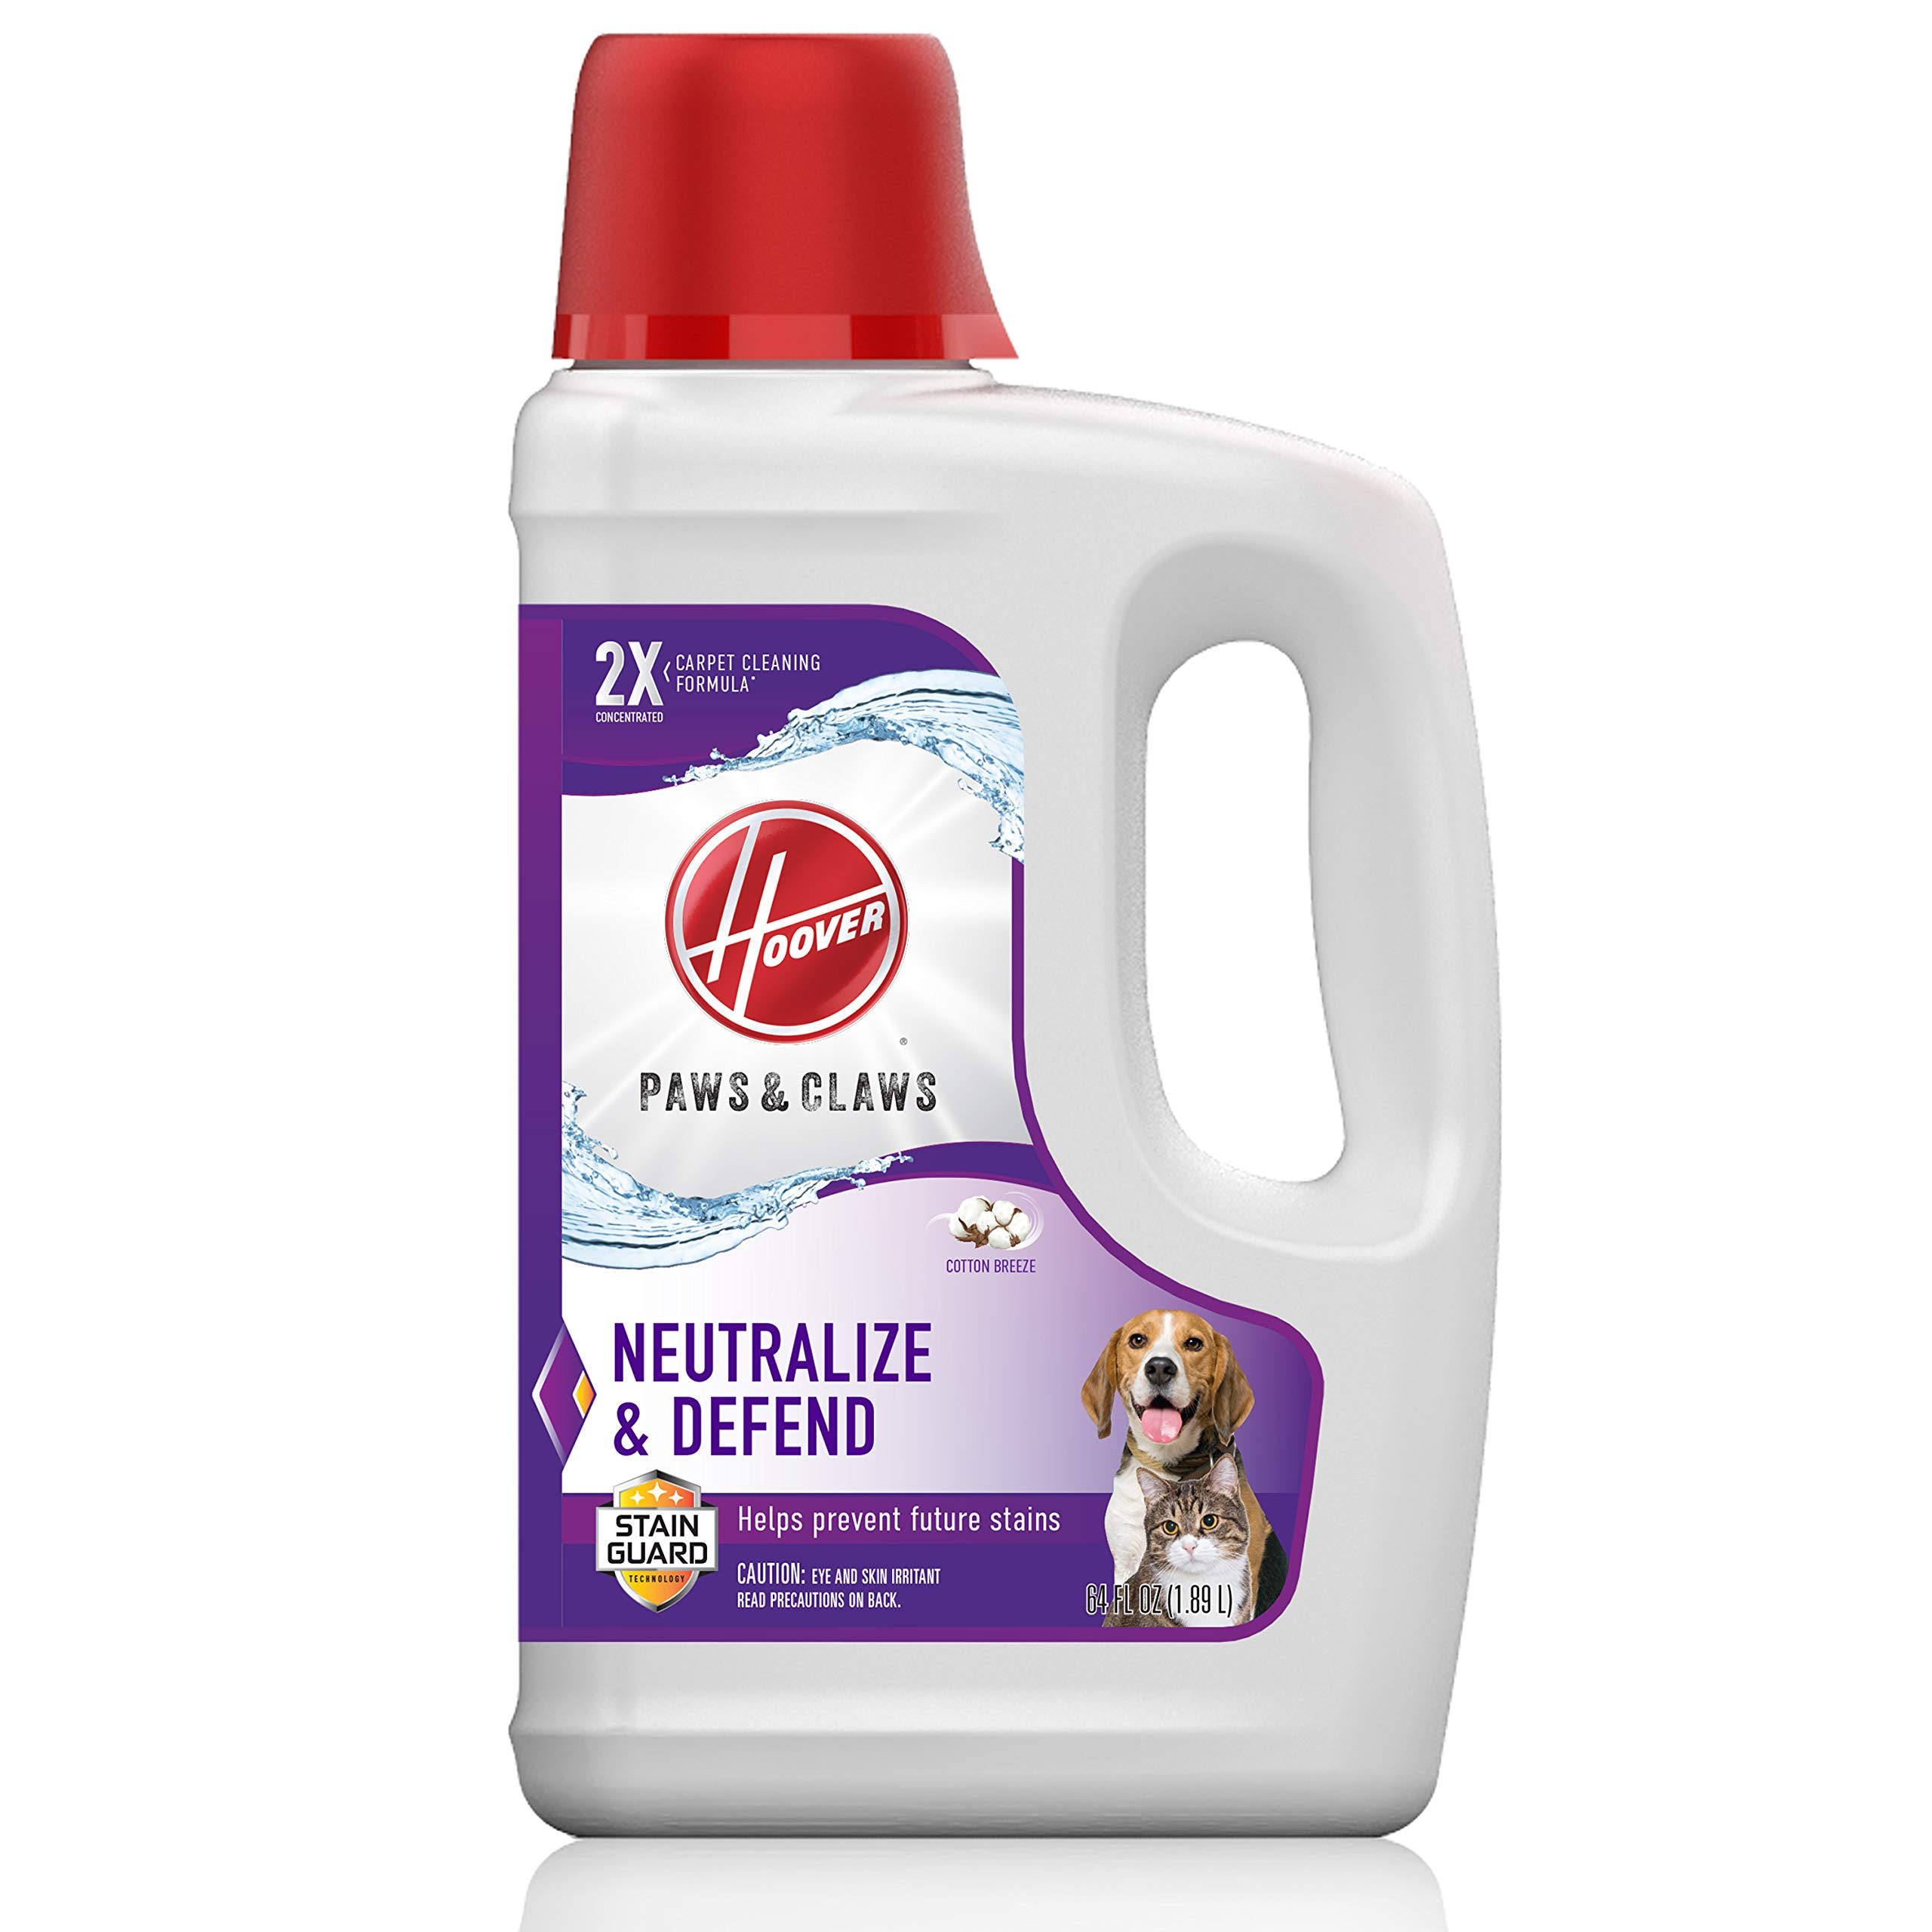 Hoover Paws & Claws Carpet Cleaning Formula with Stainguard 64 oz